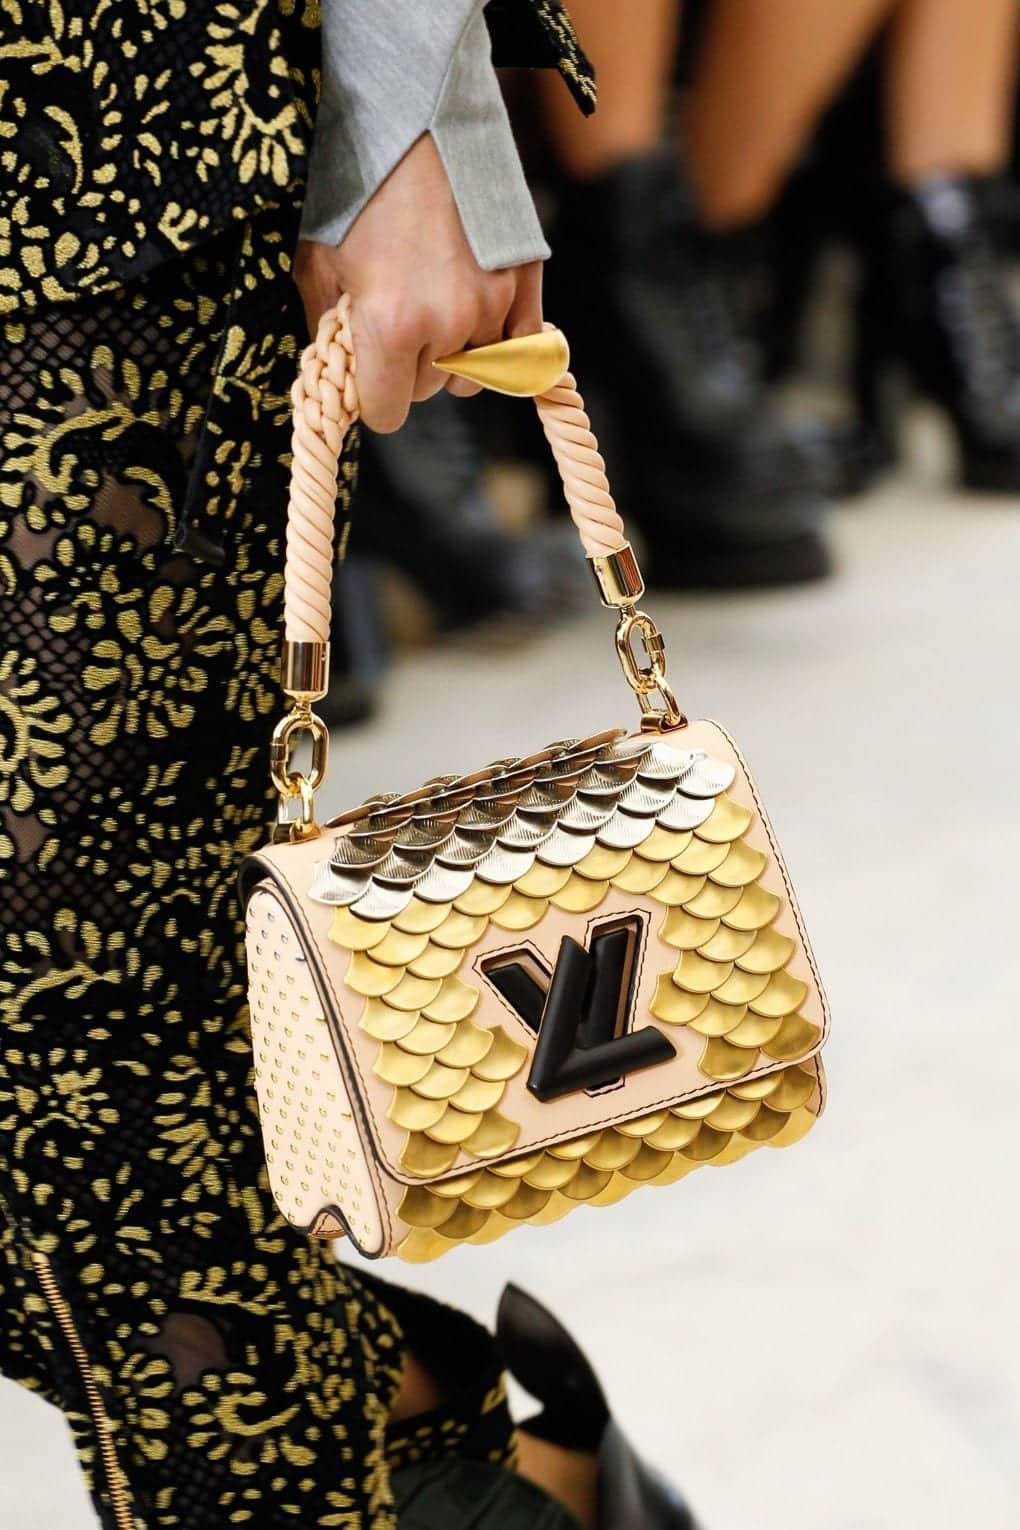 Best Bags to Buy This Year - Top 20 Designer Bags of 2019